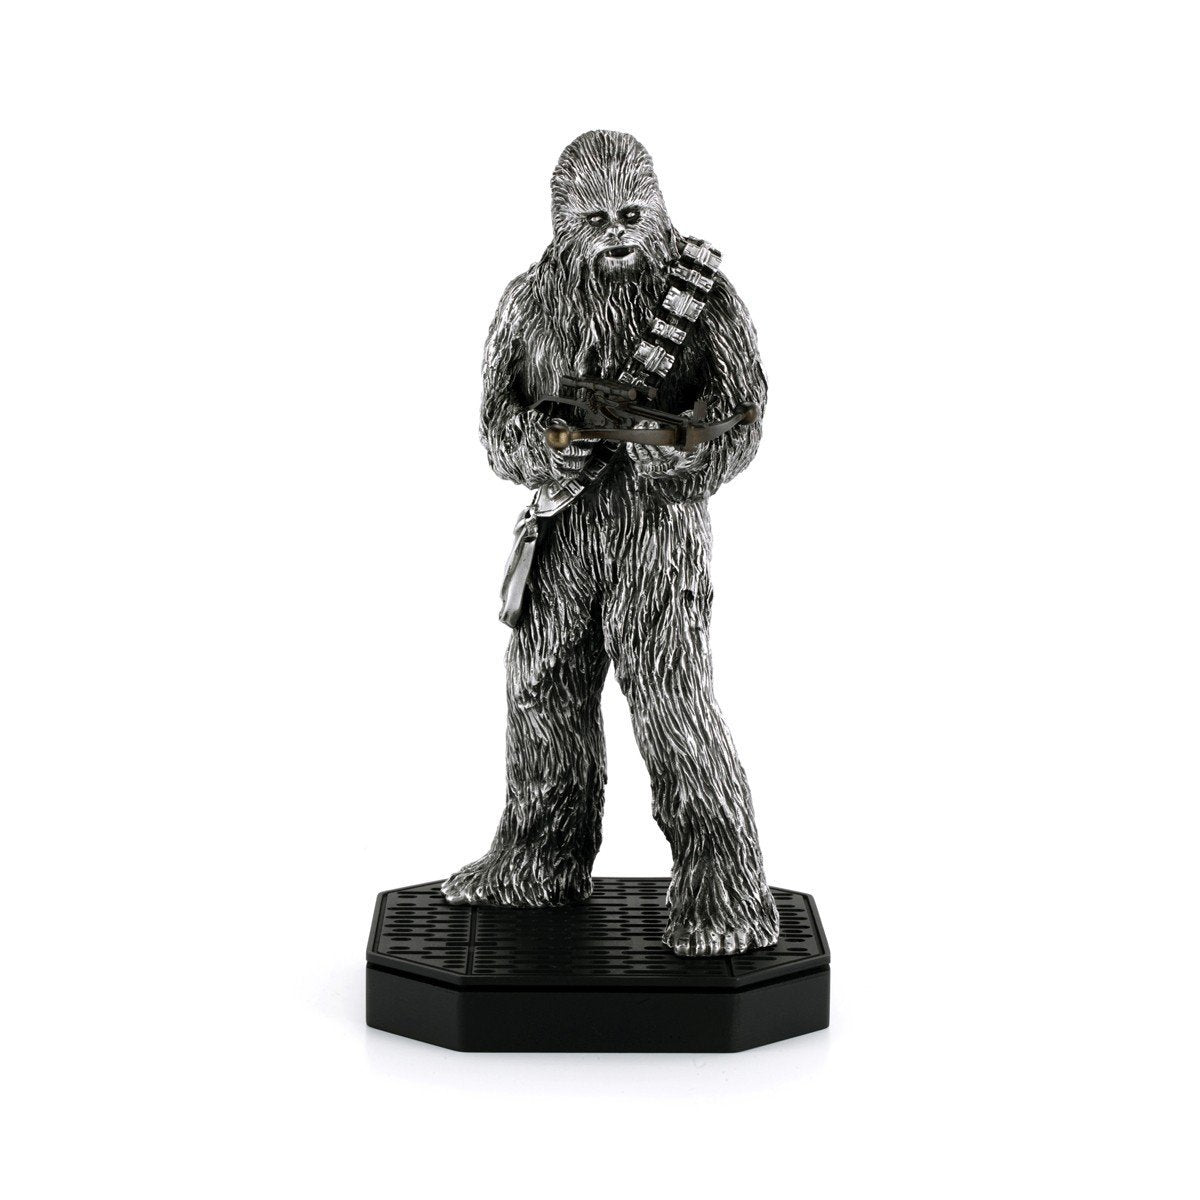 Star Wars Chewbacca Limited Edition Statue - Collectible Gift